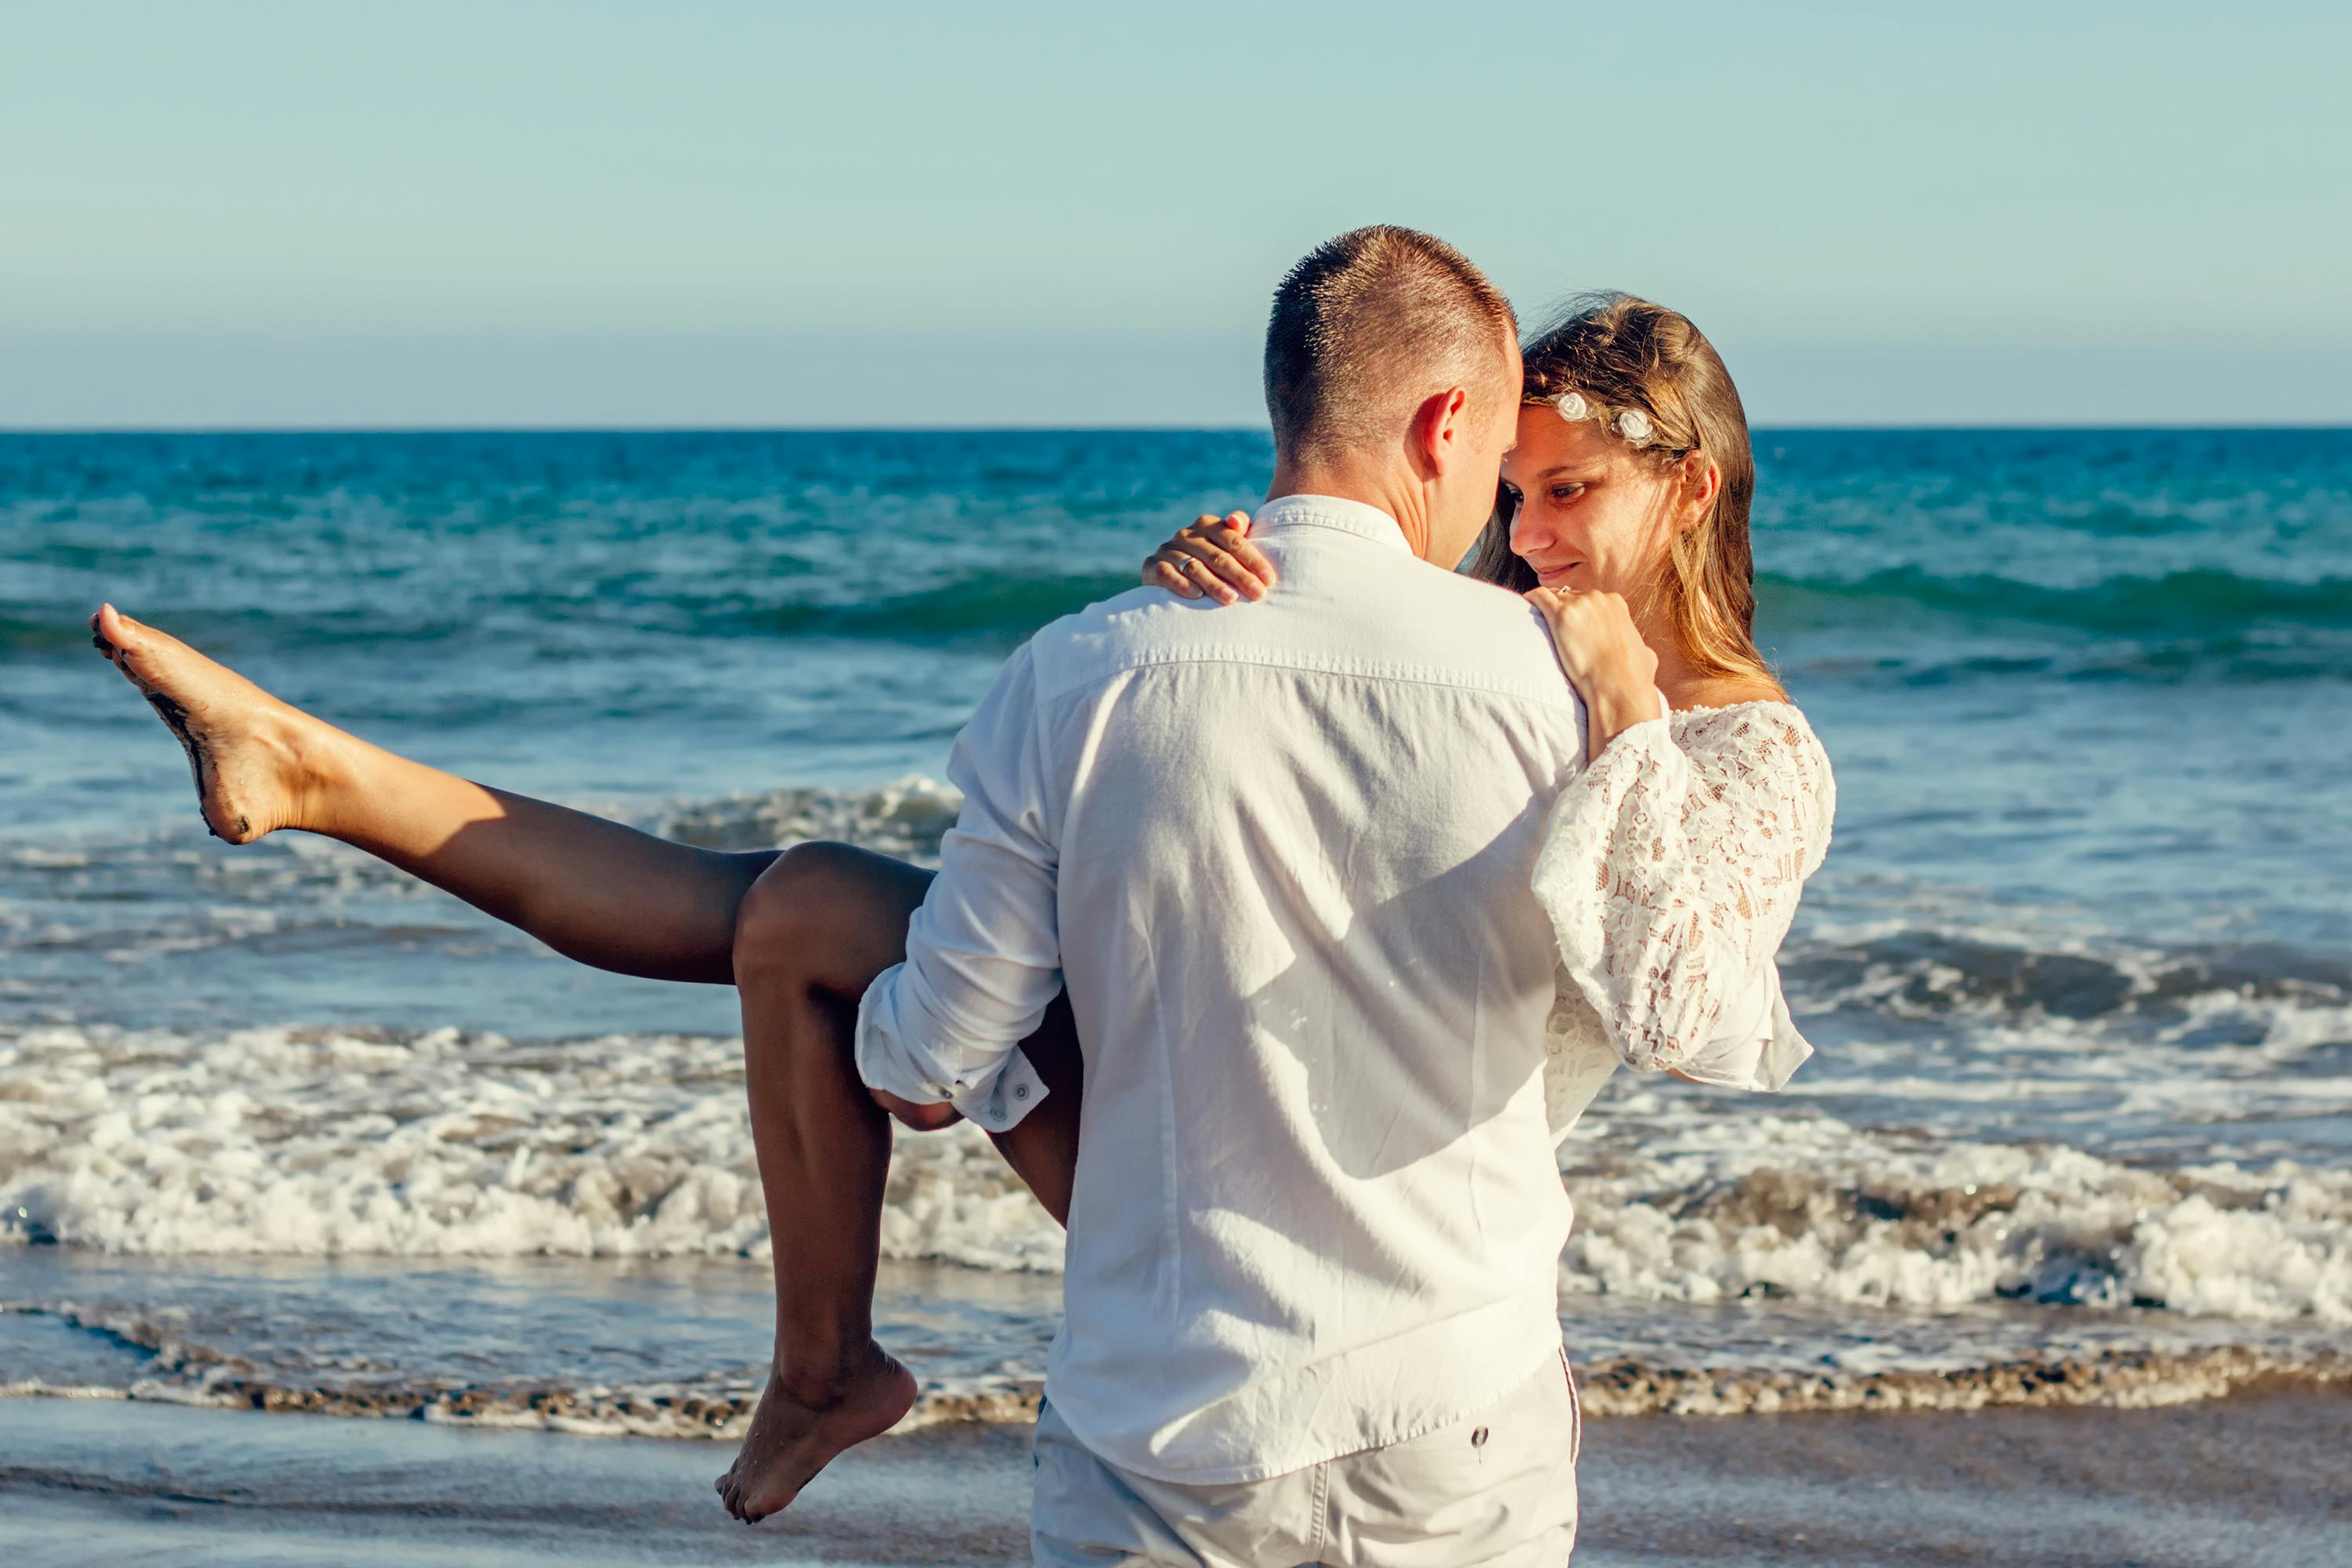 20899 Couple Posing On Beach Images Stock Photos  Vectors  Shutterstock